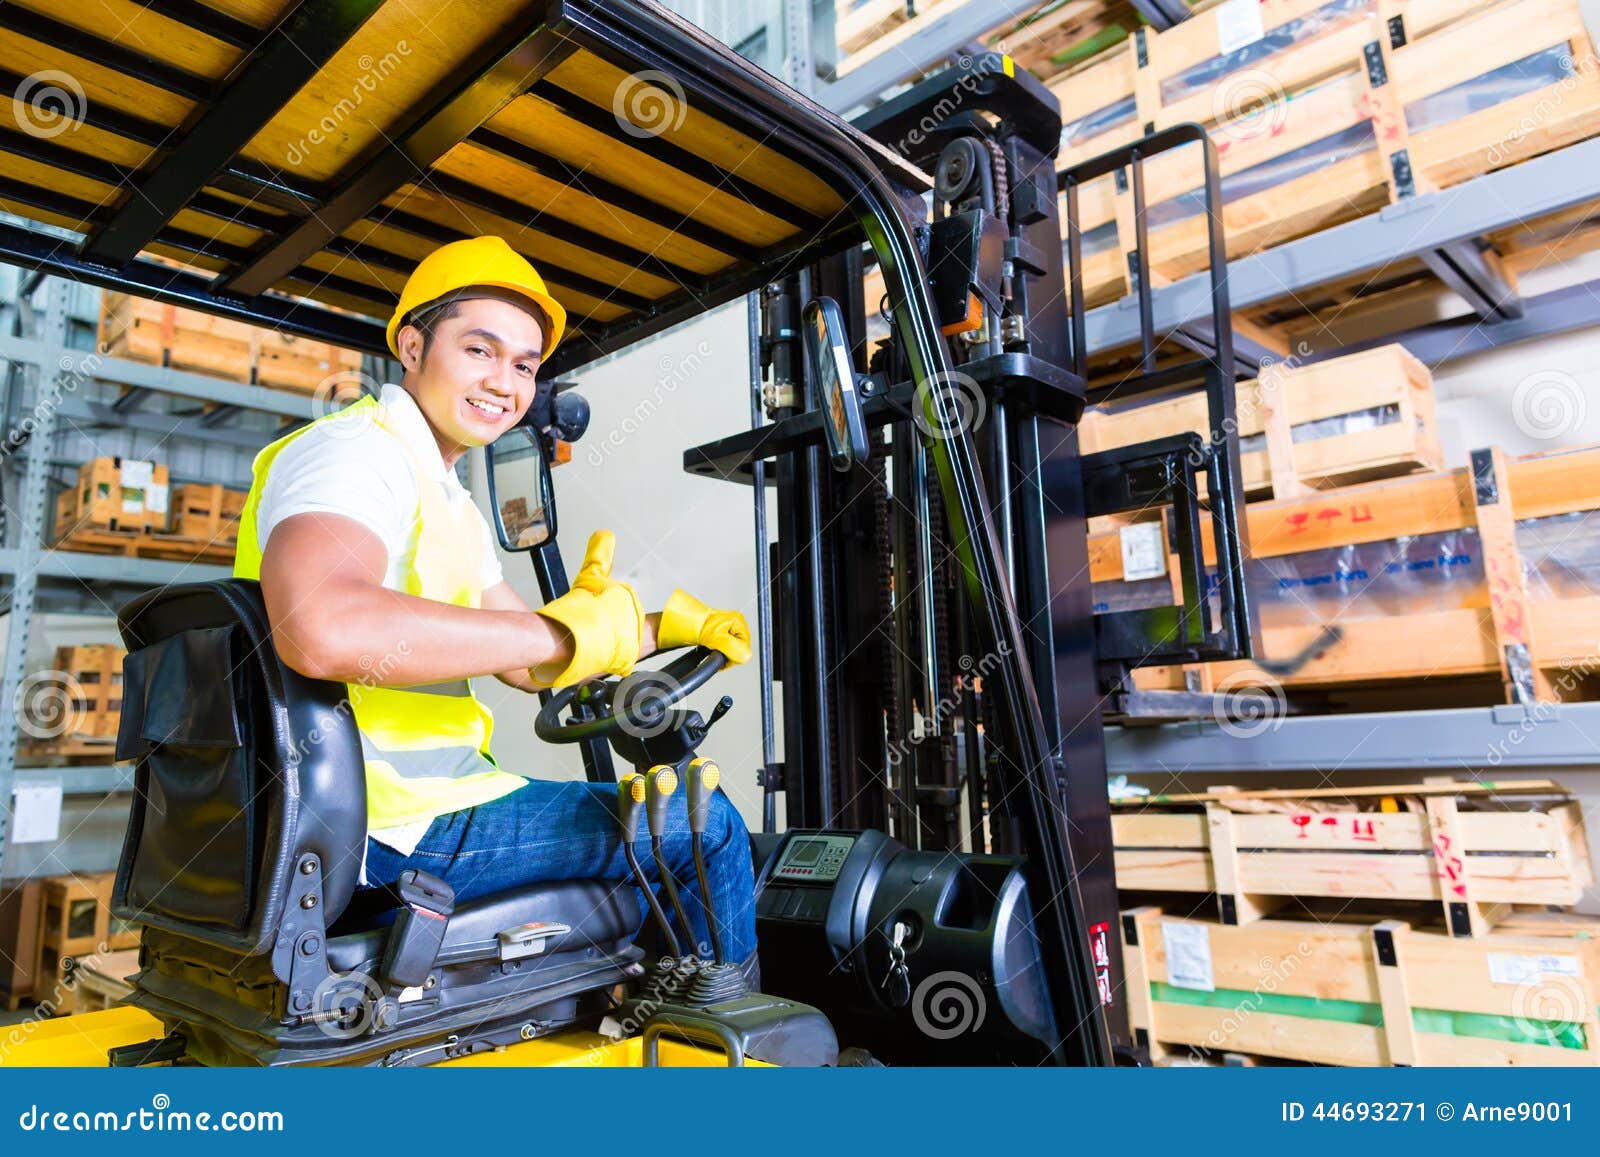 asian fork lift truck driver lifting pallet in storage